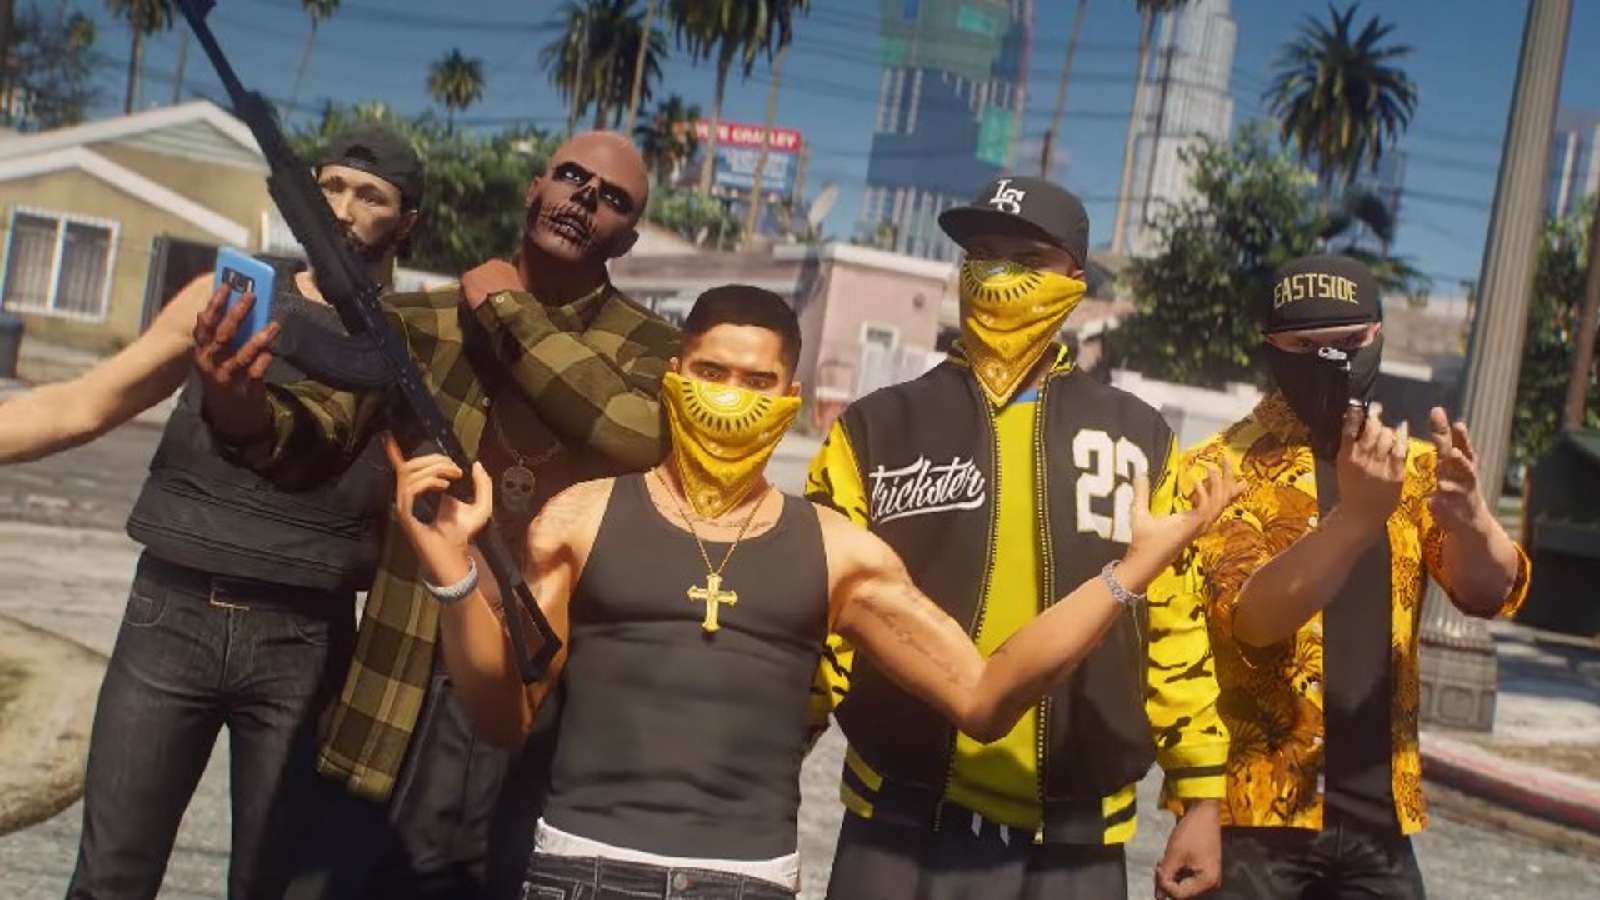 Twitch and Rockstar team up to gift GTA RP viewers 600,000 subs